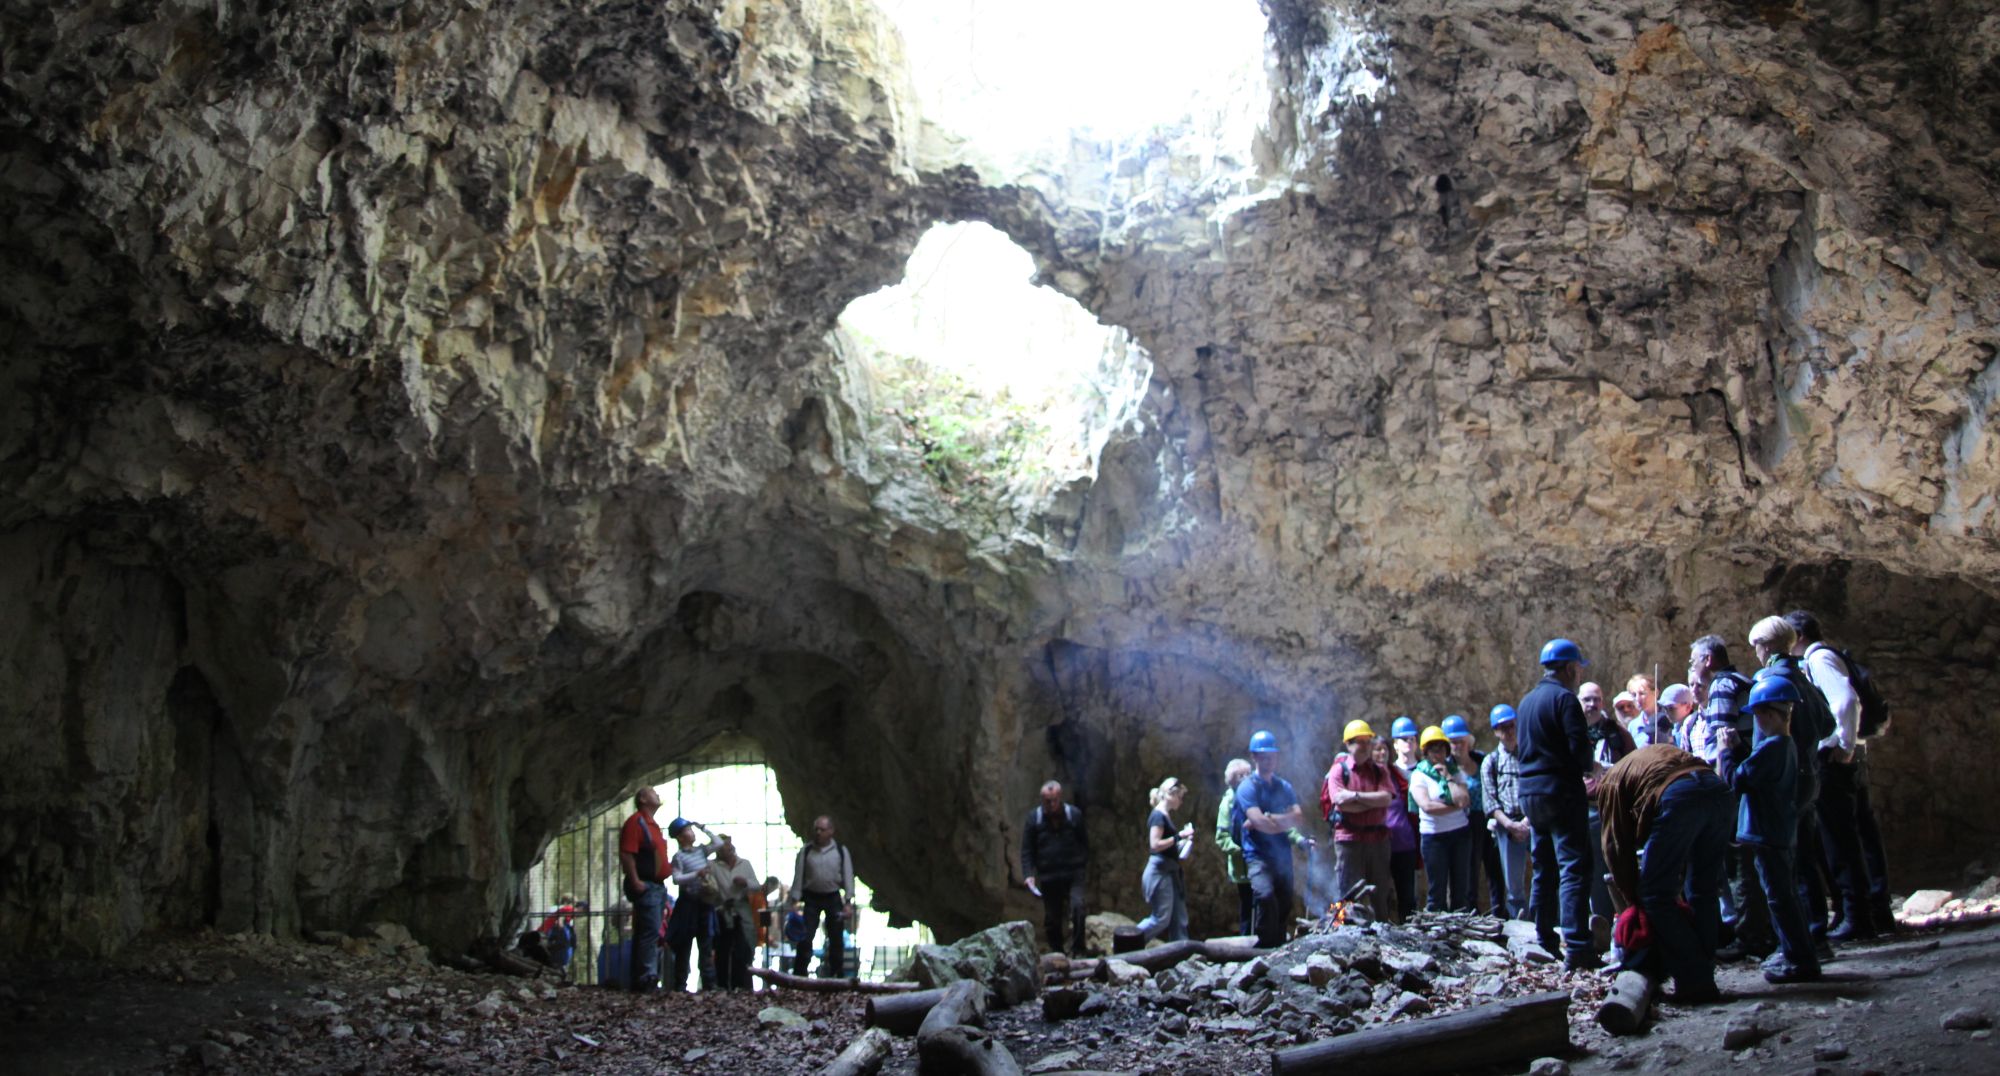 A guided tour at the Brillenhöhle Cave